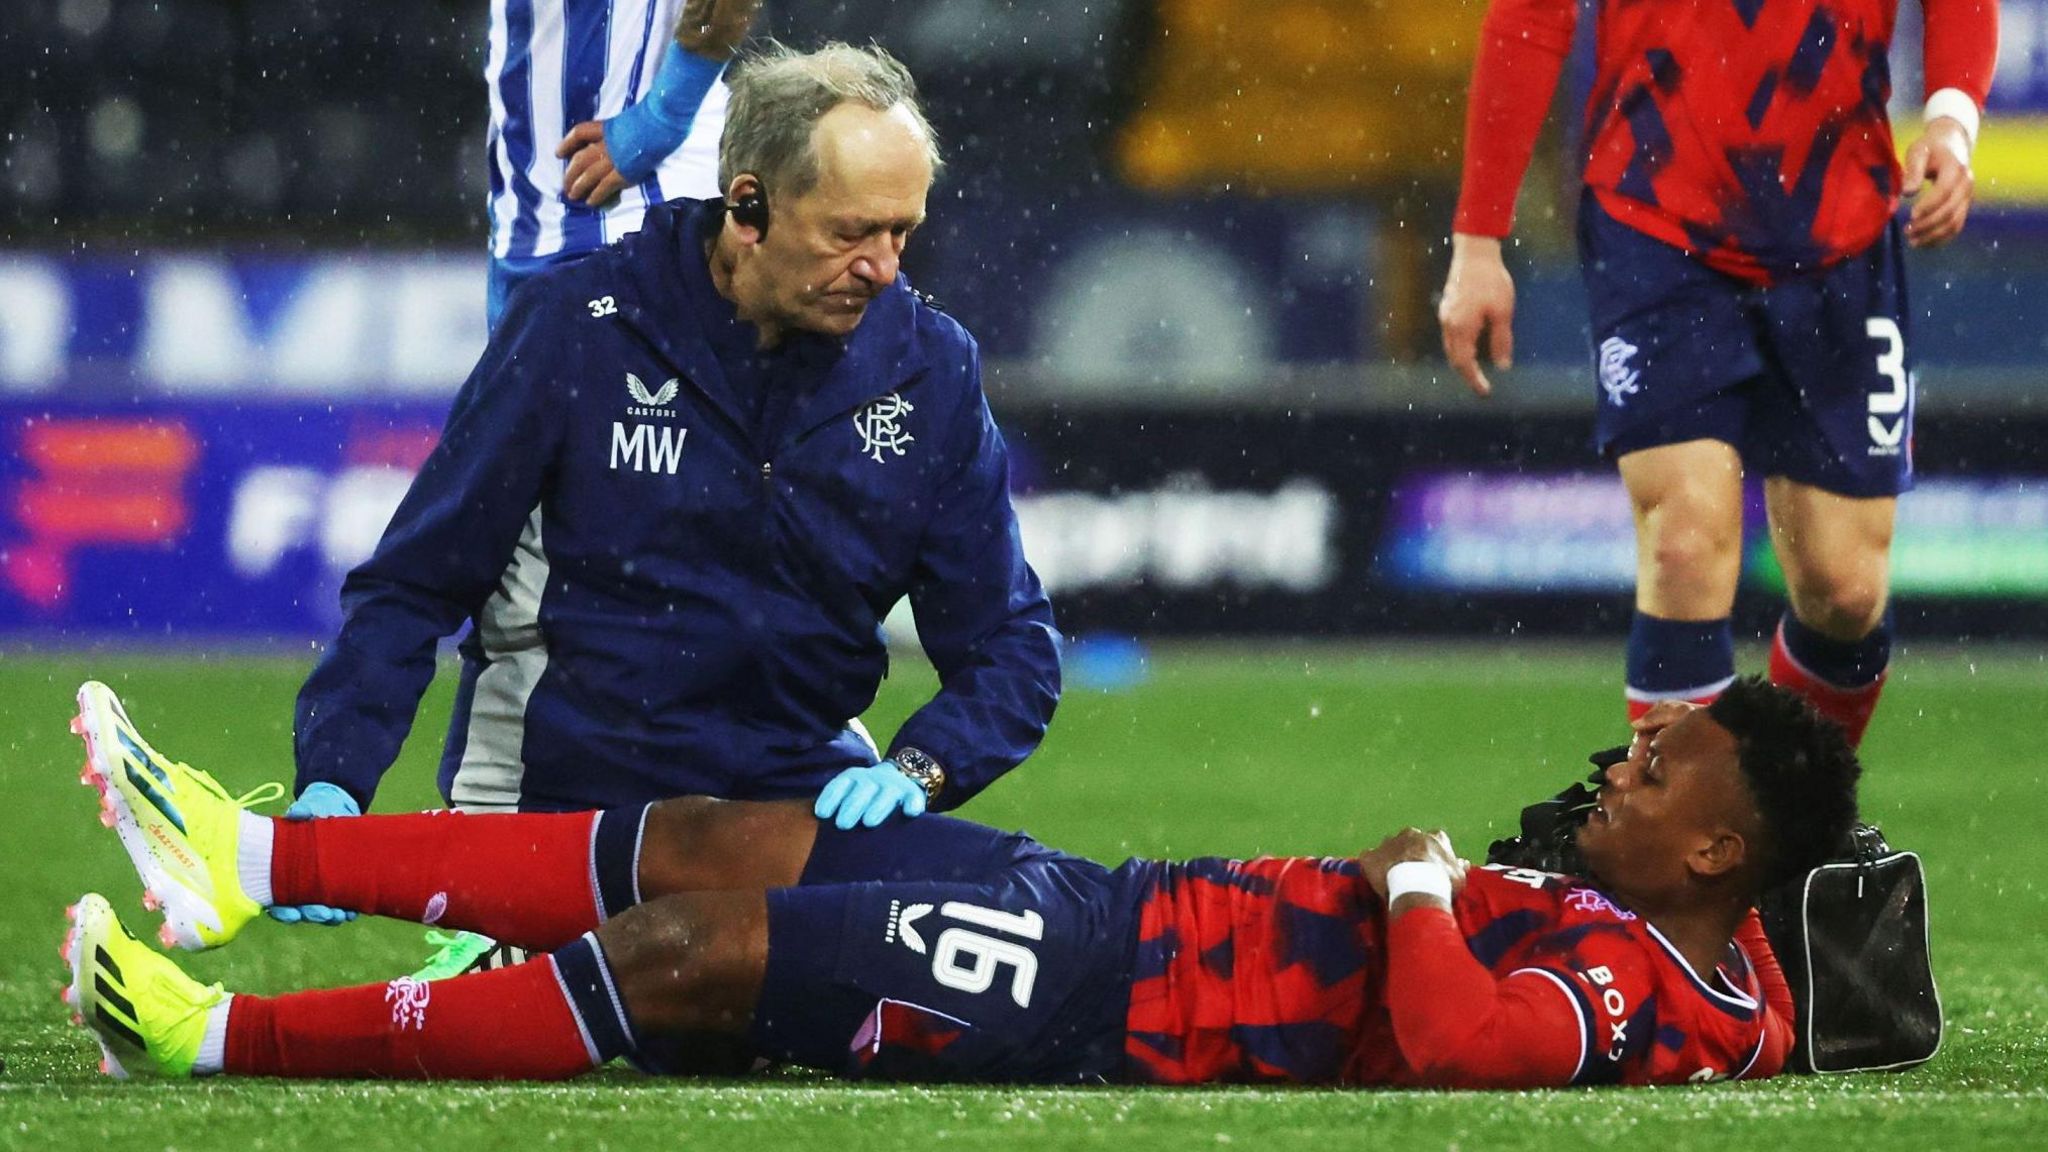 Rangers' Oscar Cortes receives treatment at Rugby Park